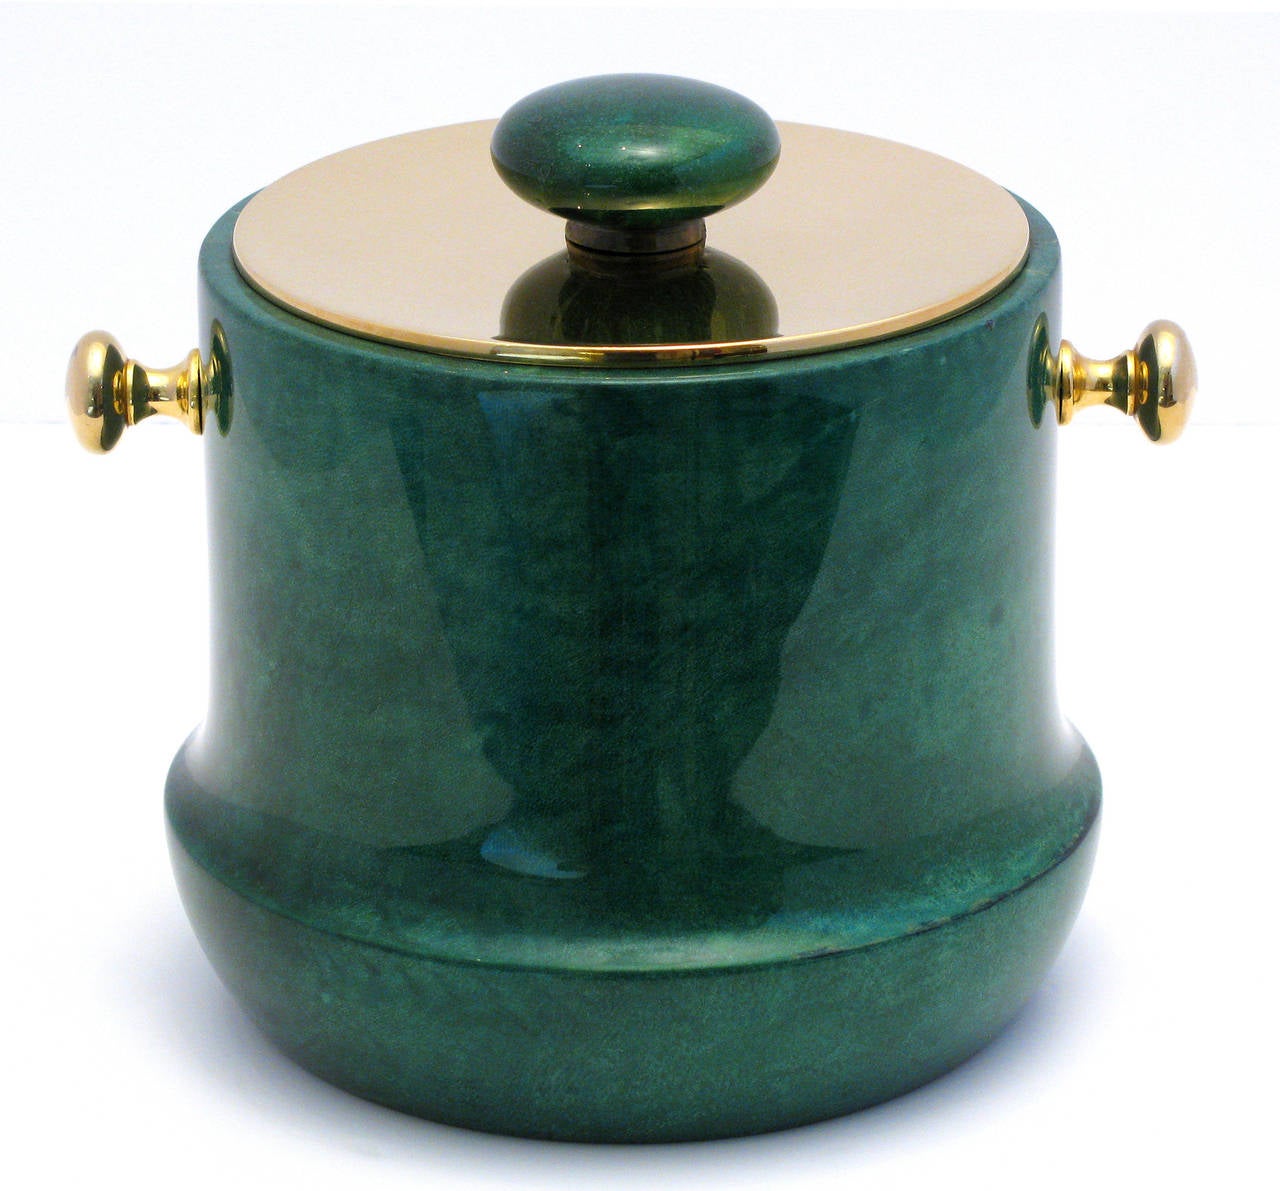 A Classic Italian ice bucket by Aldo Tura, of emerald color lacquered goatskin on wood; with polished brass lid and handles. The interior lining is black plastic.